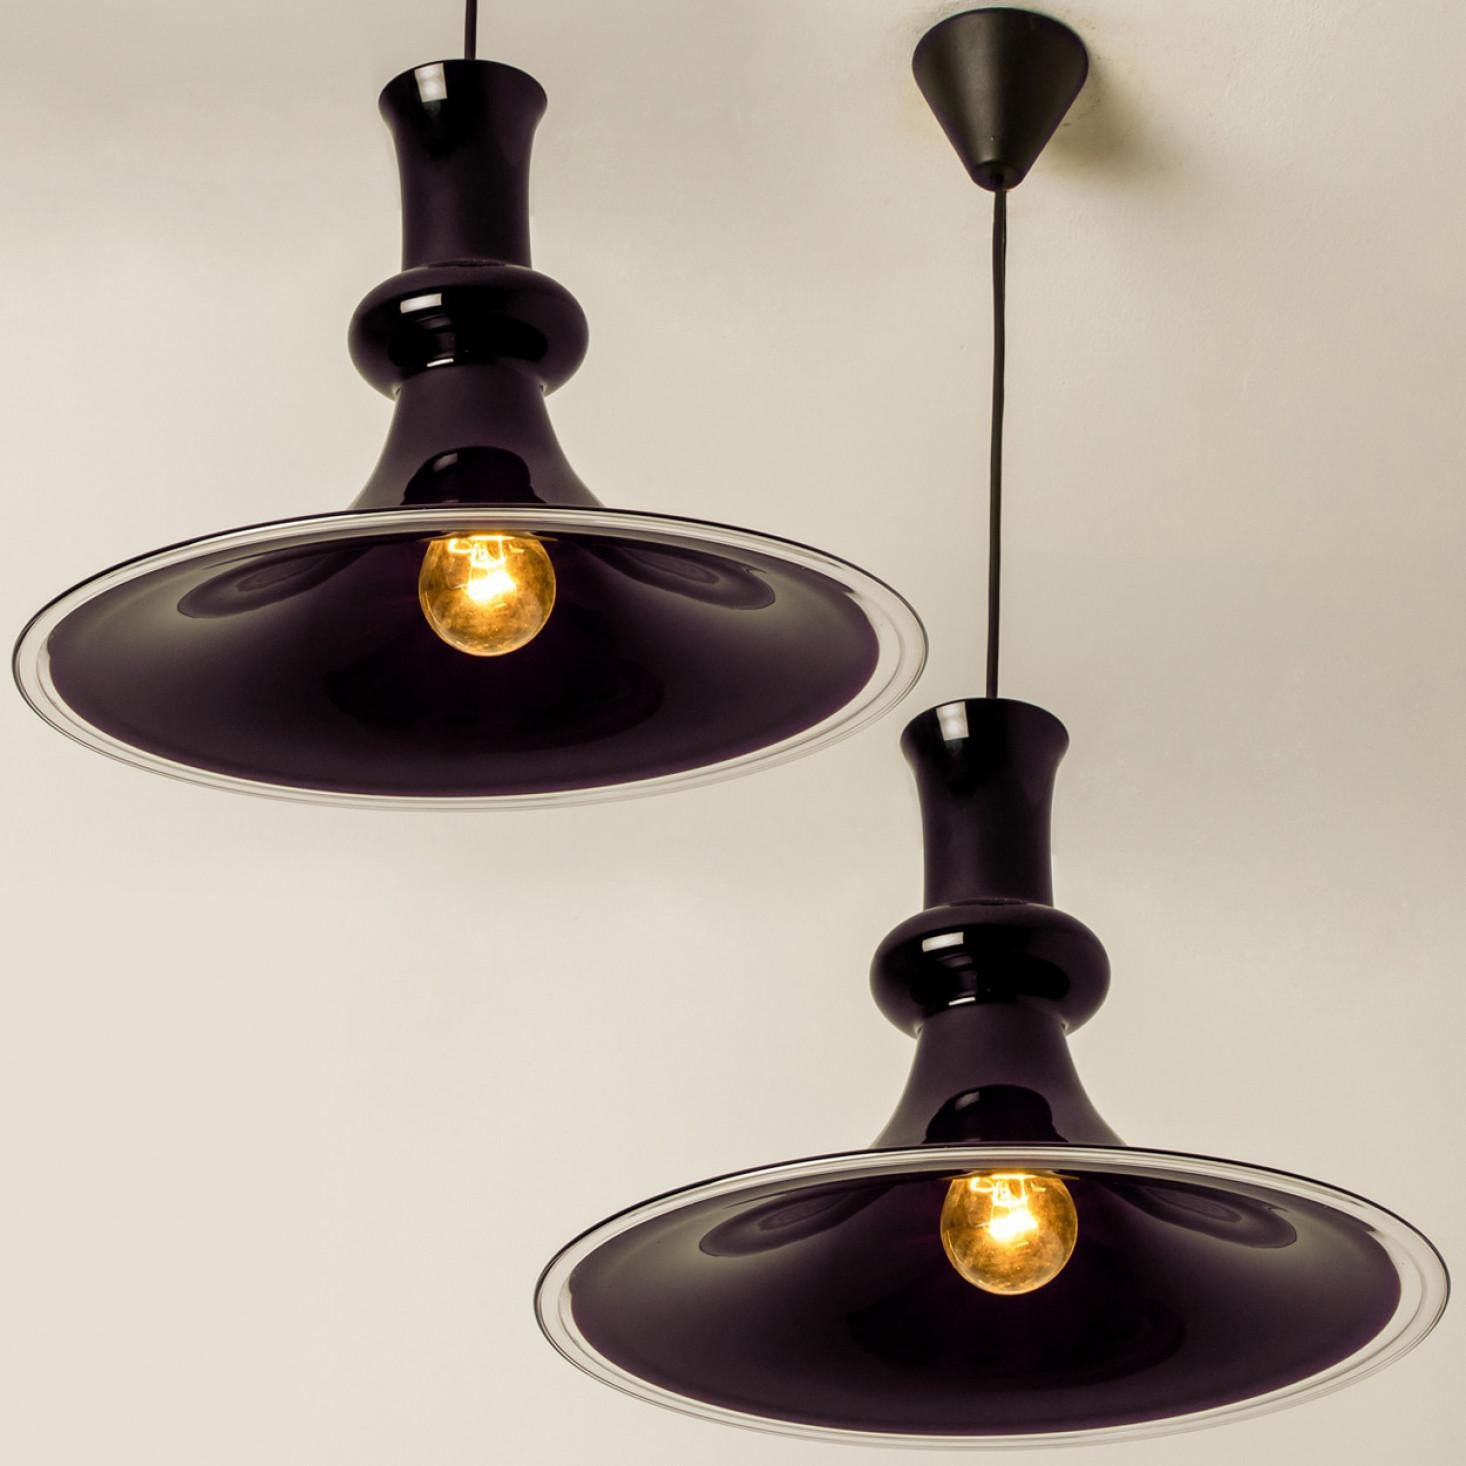 Pair of Aubergine Holmegaard Hanging Lamps model Etude by Michael Bang, 1970 In Good Condition For Sale In Rijssen, NL